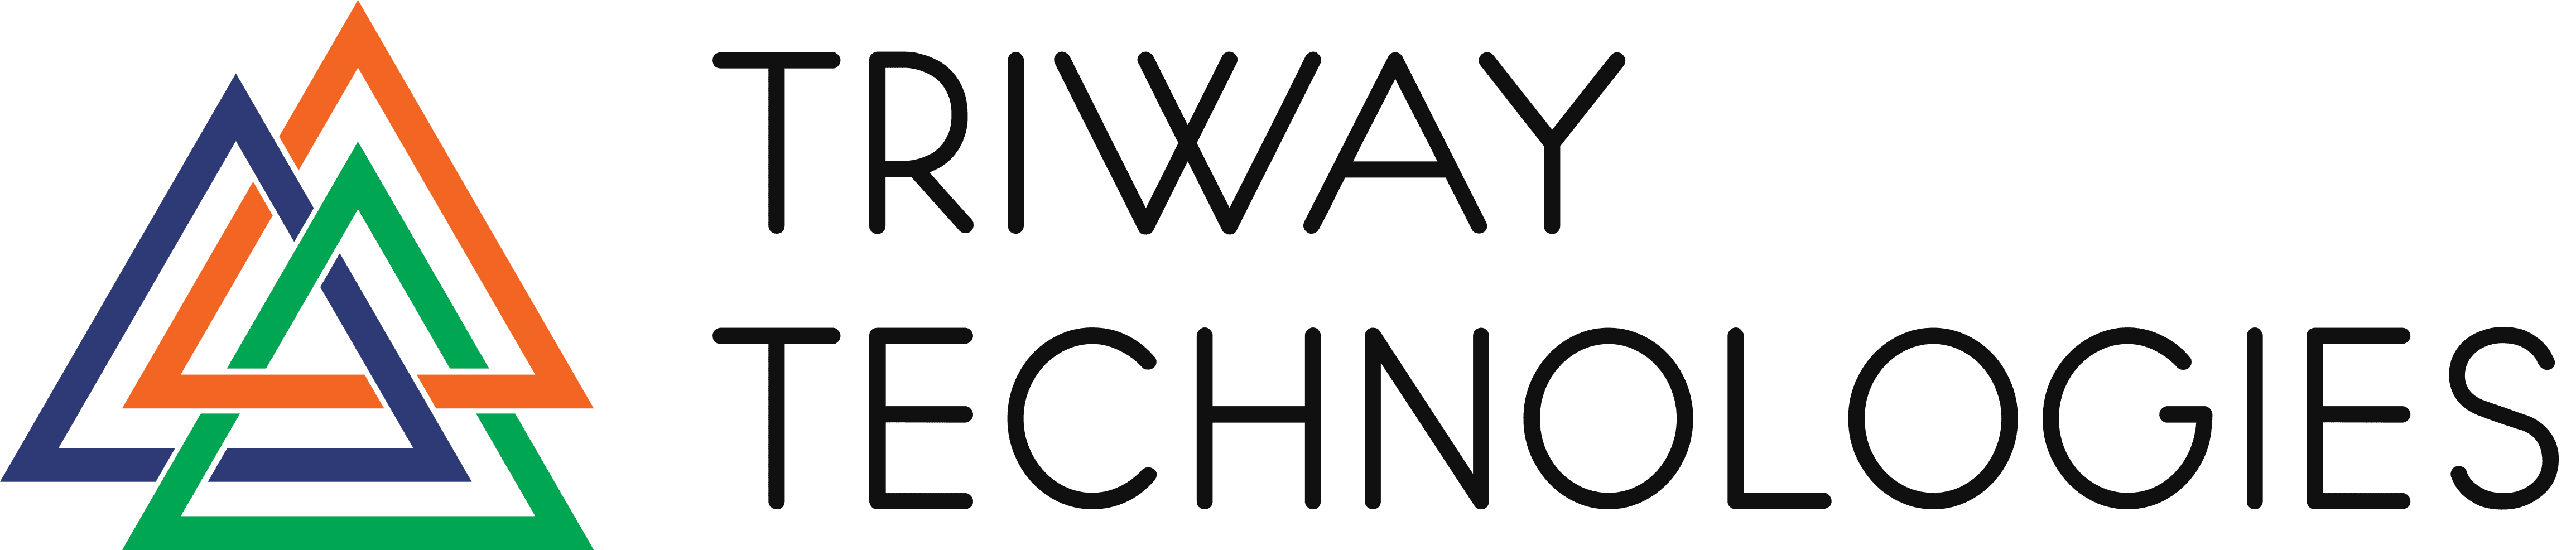 Triway Technologies